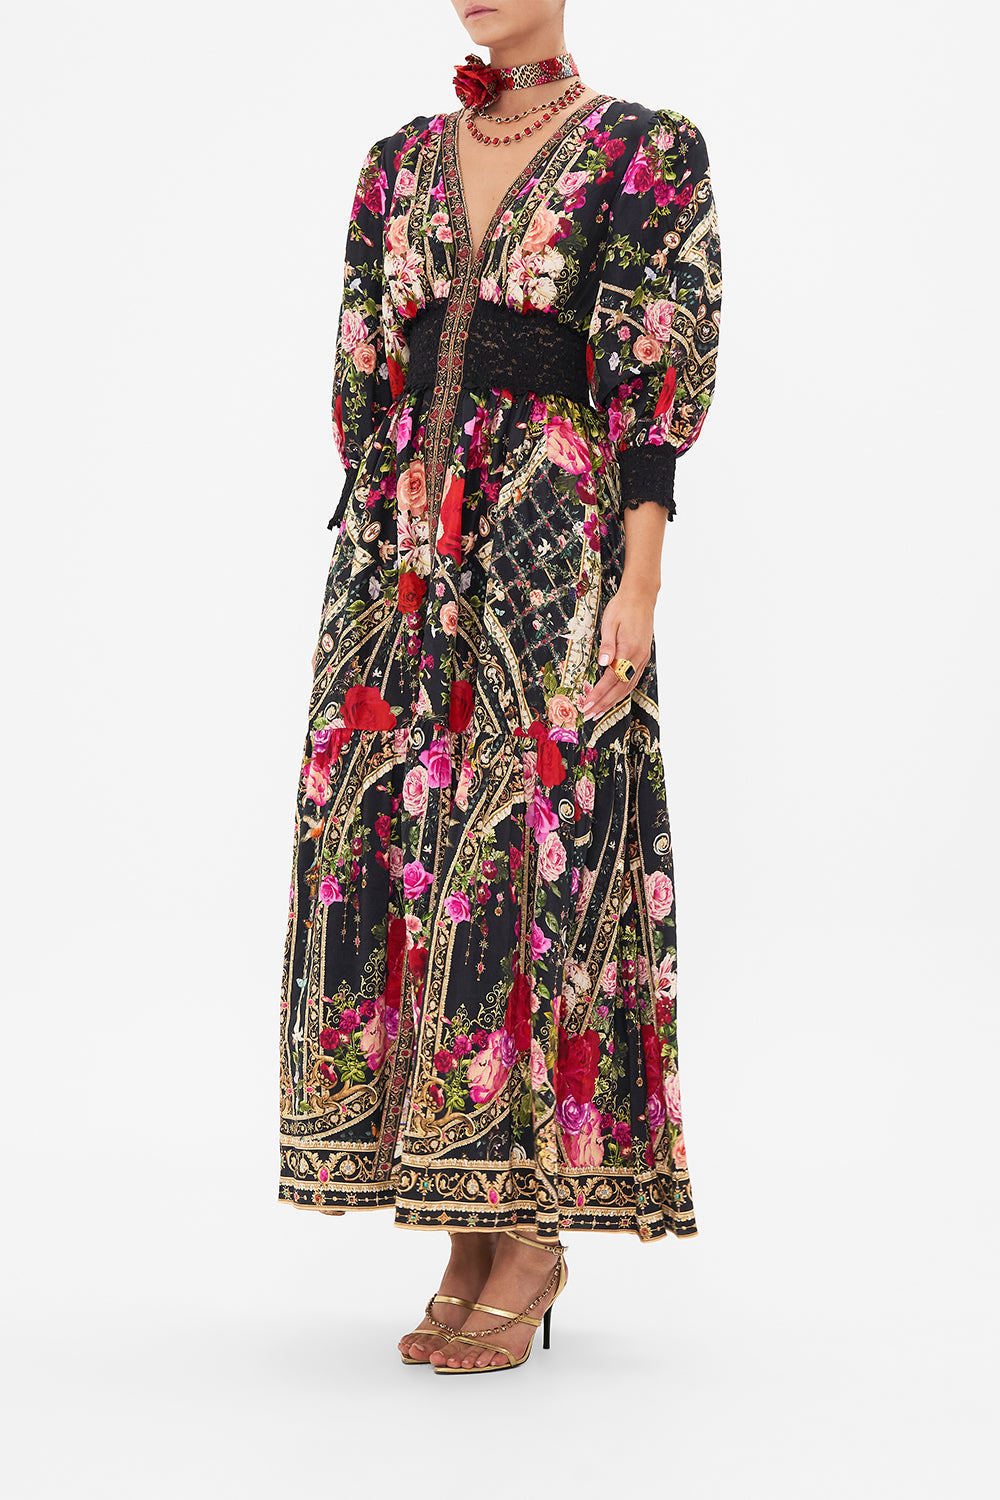 Side view of model wearing CAMILLA floral maxi dress in Reservation For Love print